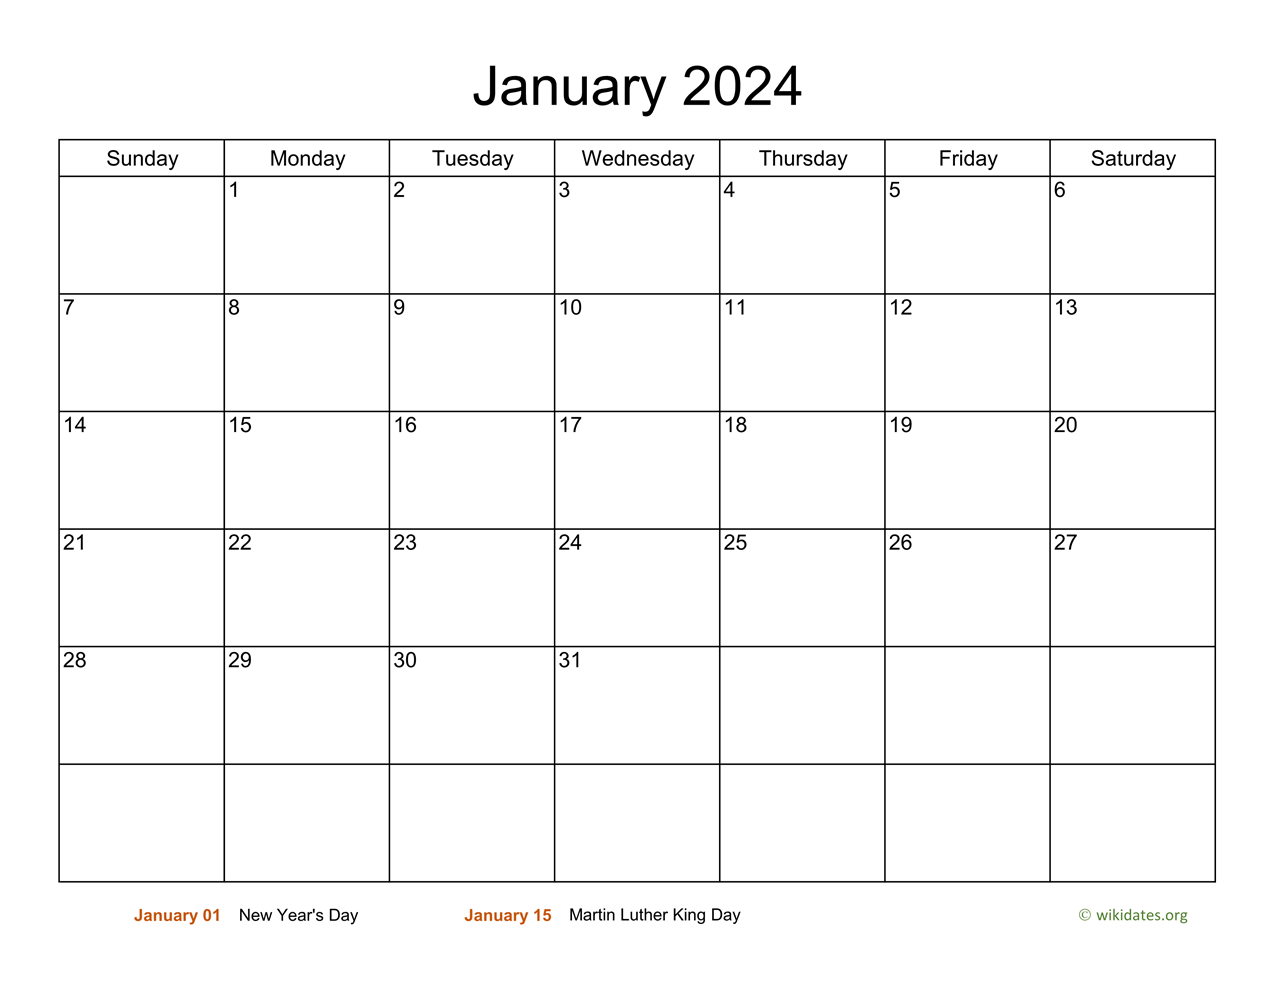 Monthly Basic Calendar for 2024 | WikiDates.org